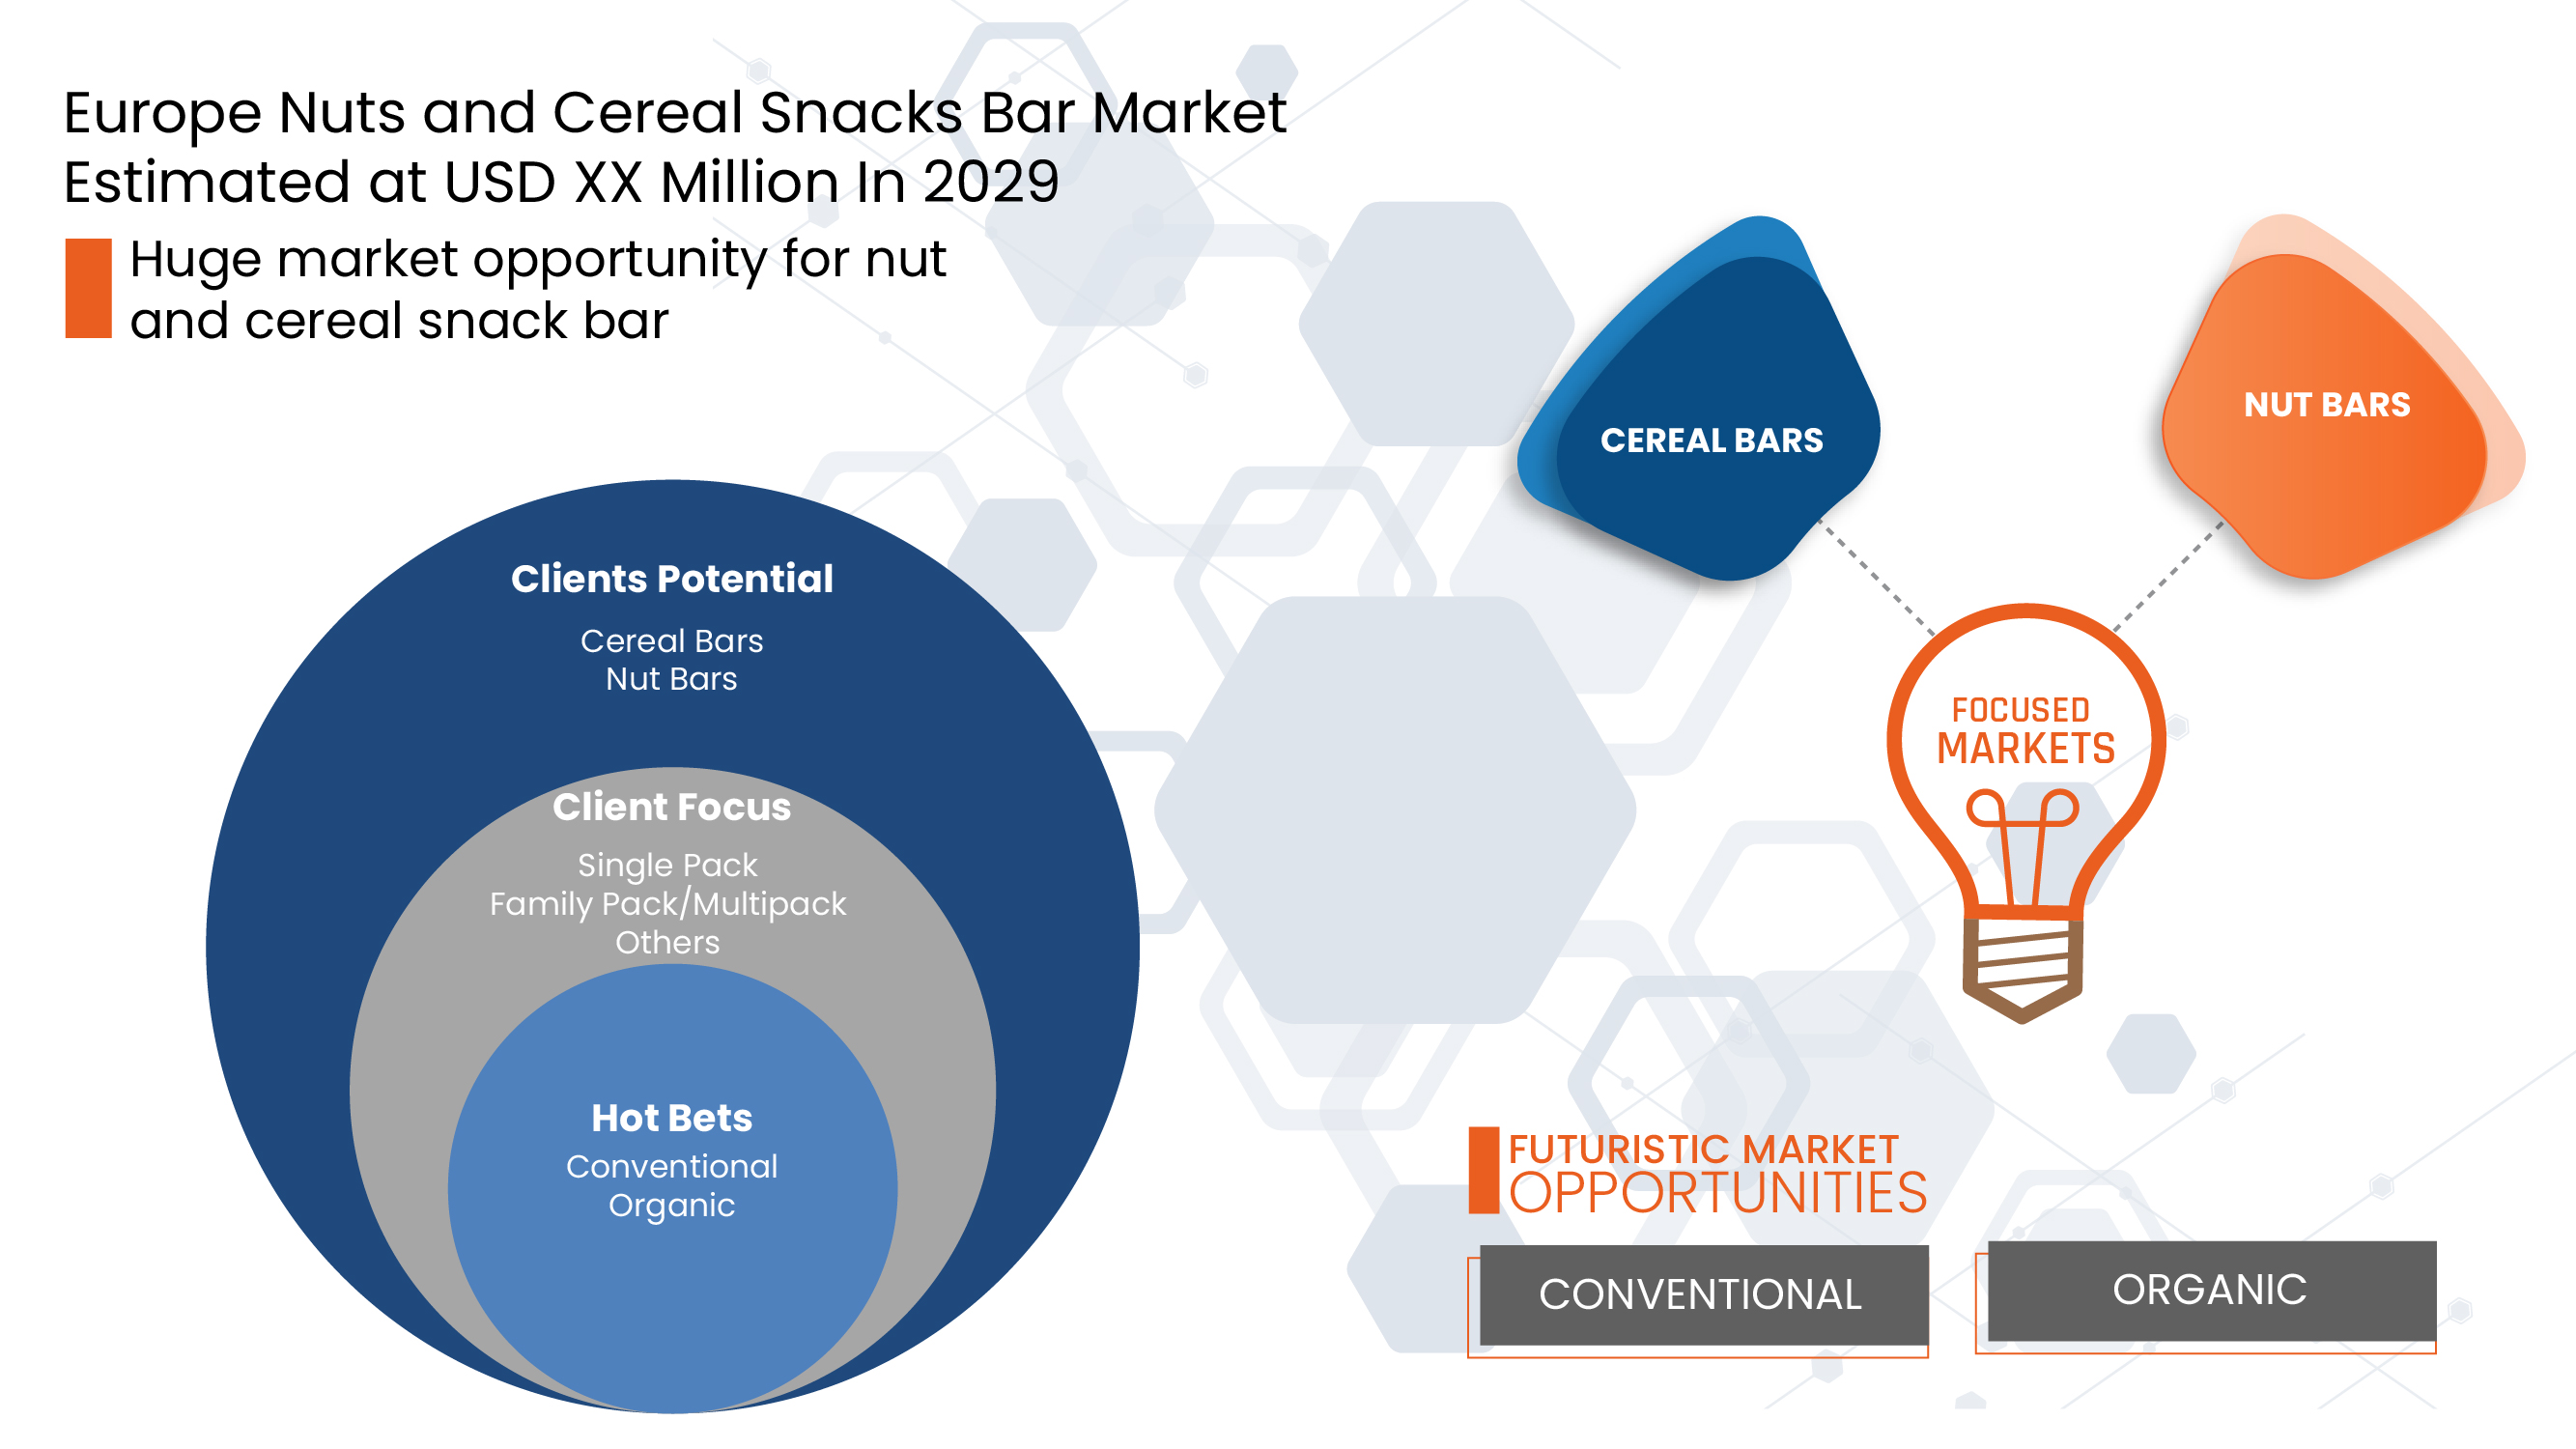 Europe Nuts and Cereal Snacks Bar Market